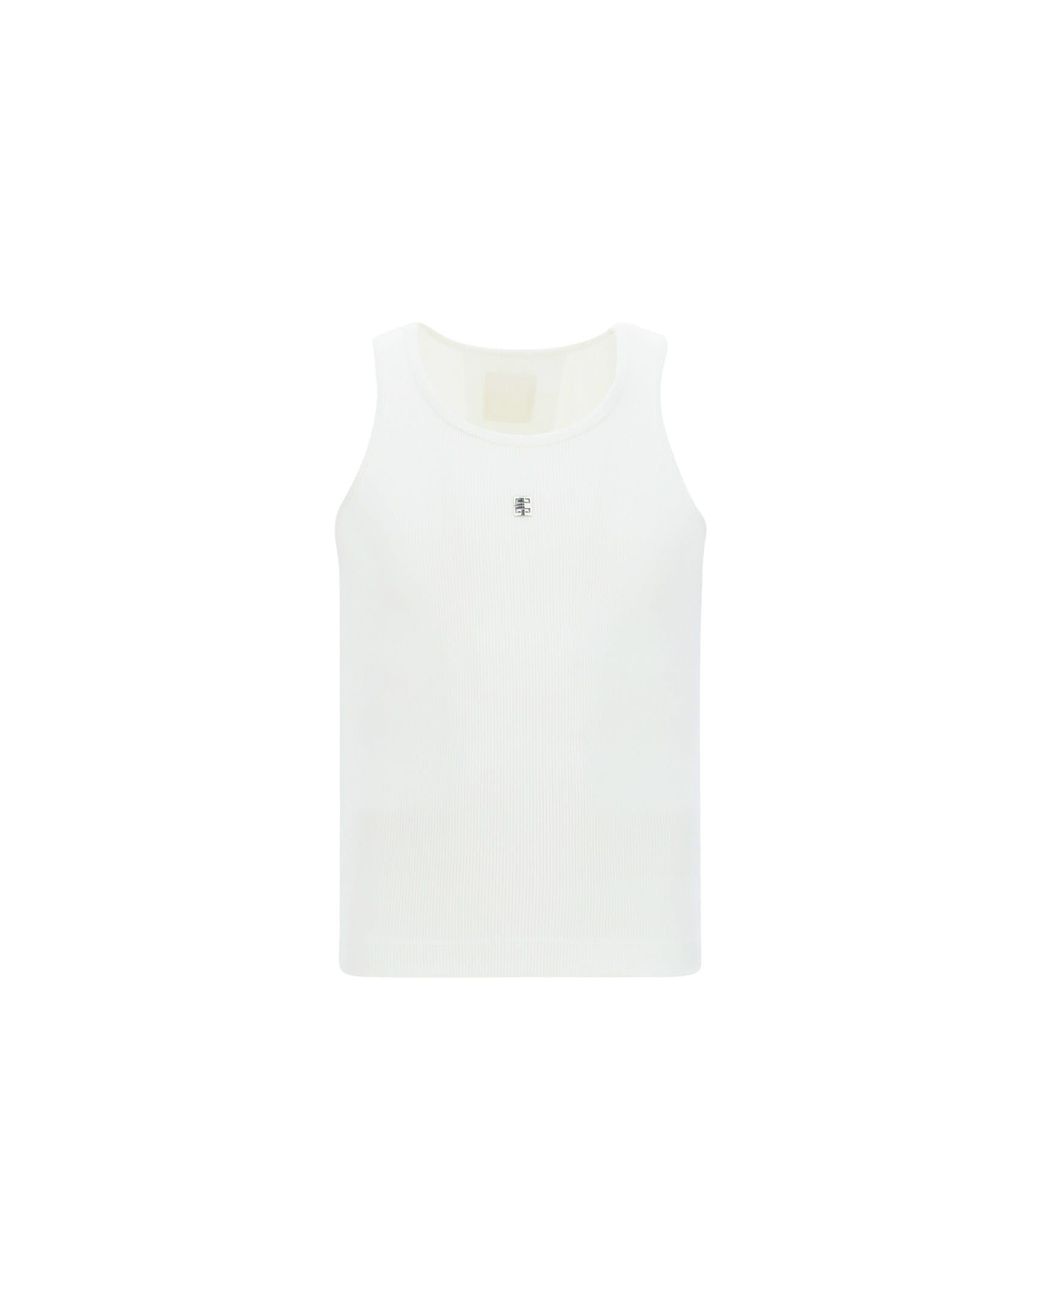 Givenchy Tank Top in White | Lyst UK